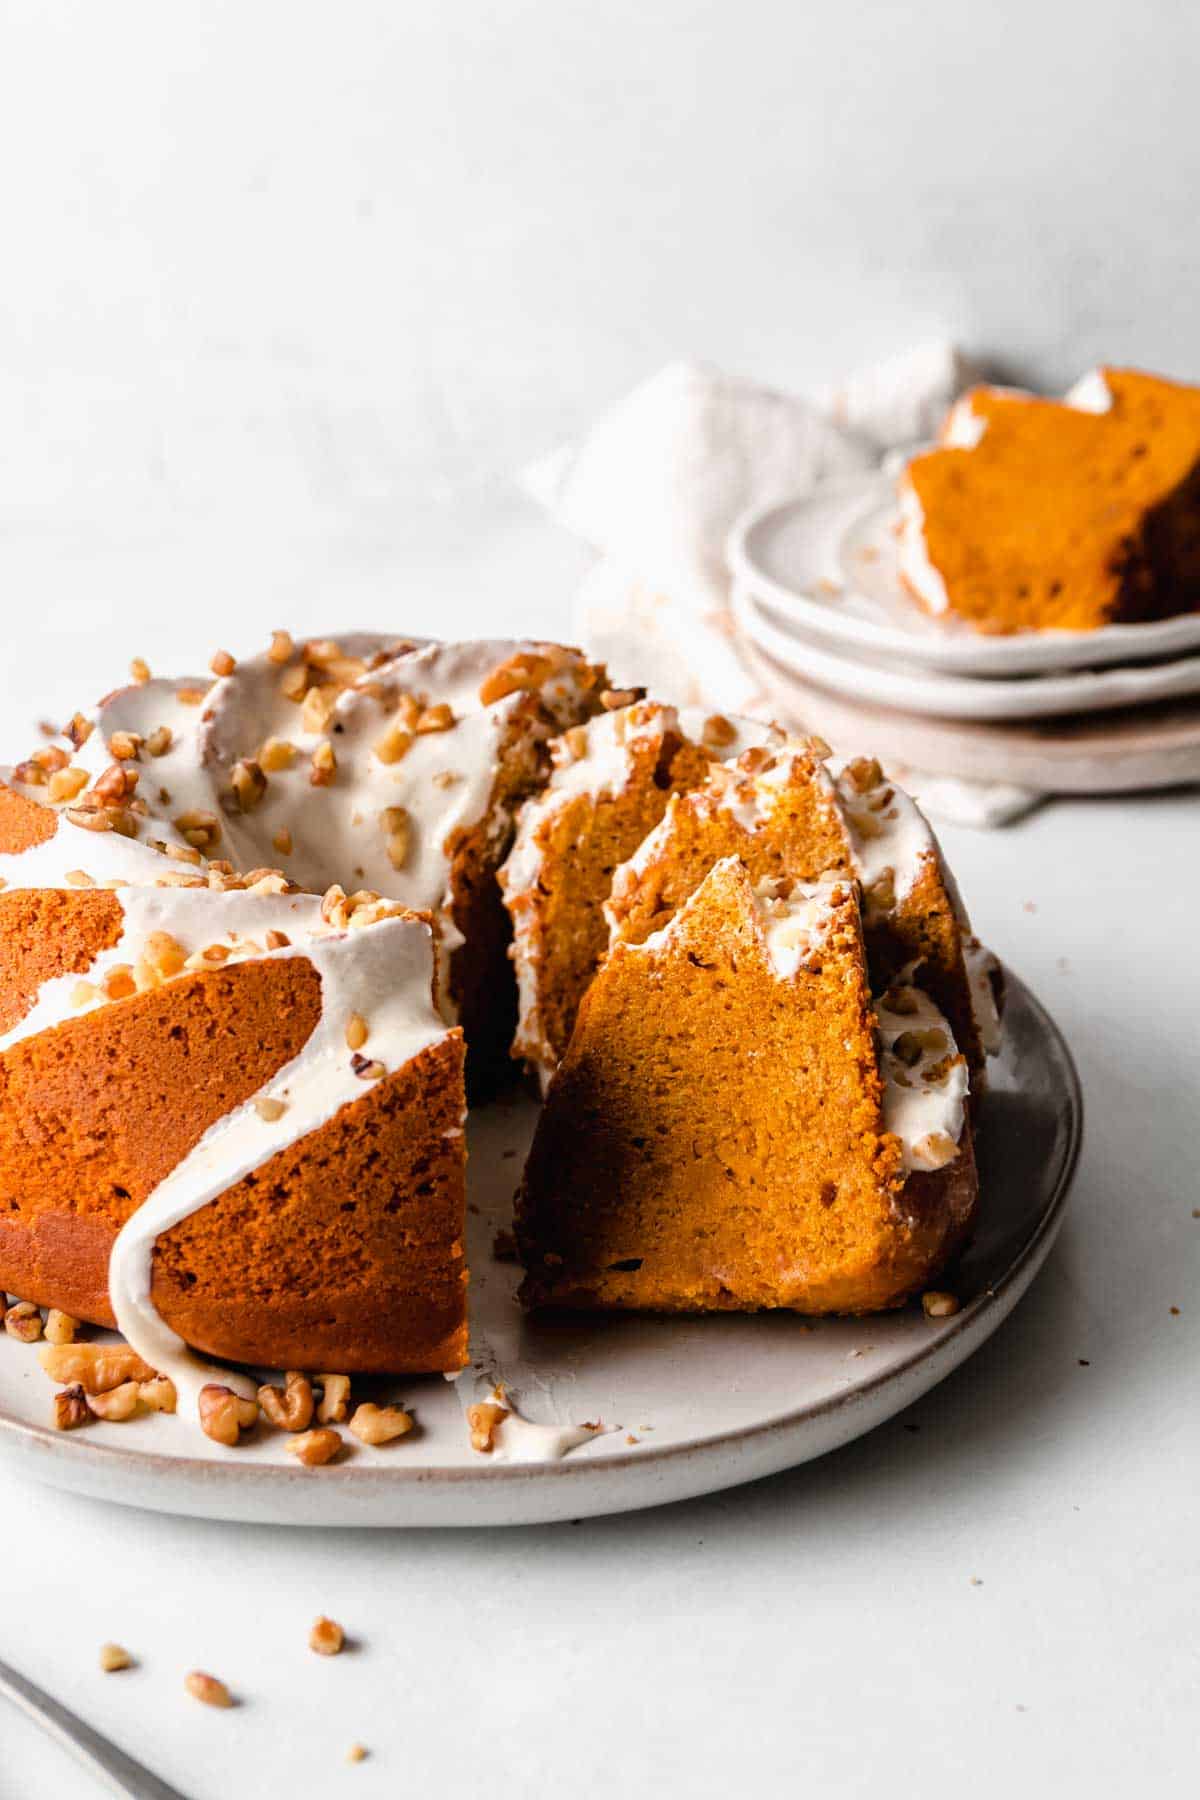 Gluten-free pumpkin bundt cake, partially sliced, with slice on a small plate.